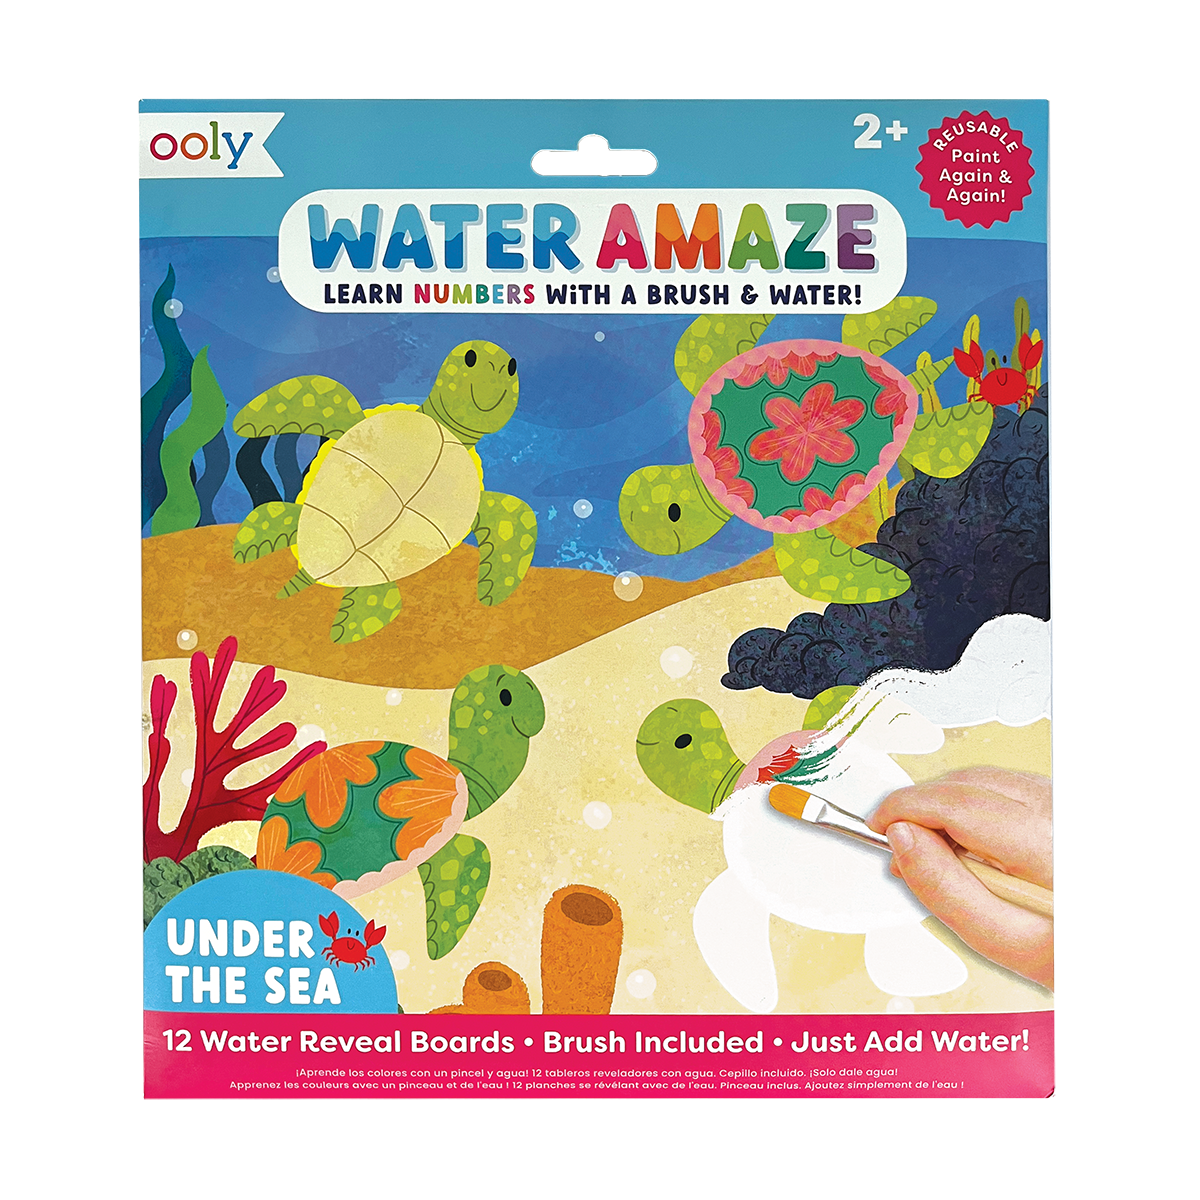 OOLY Water Amaze Under the Sea in package